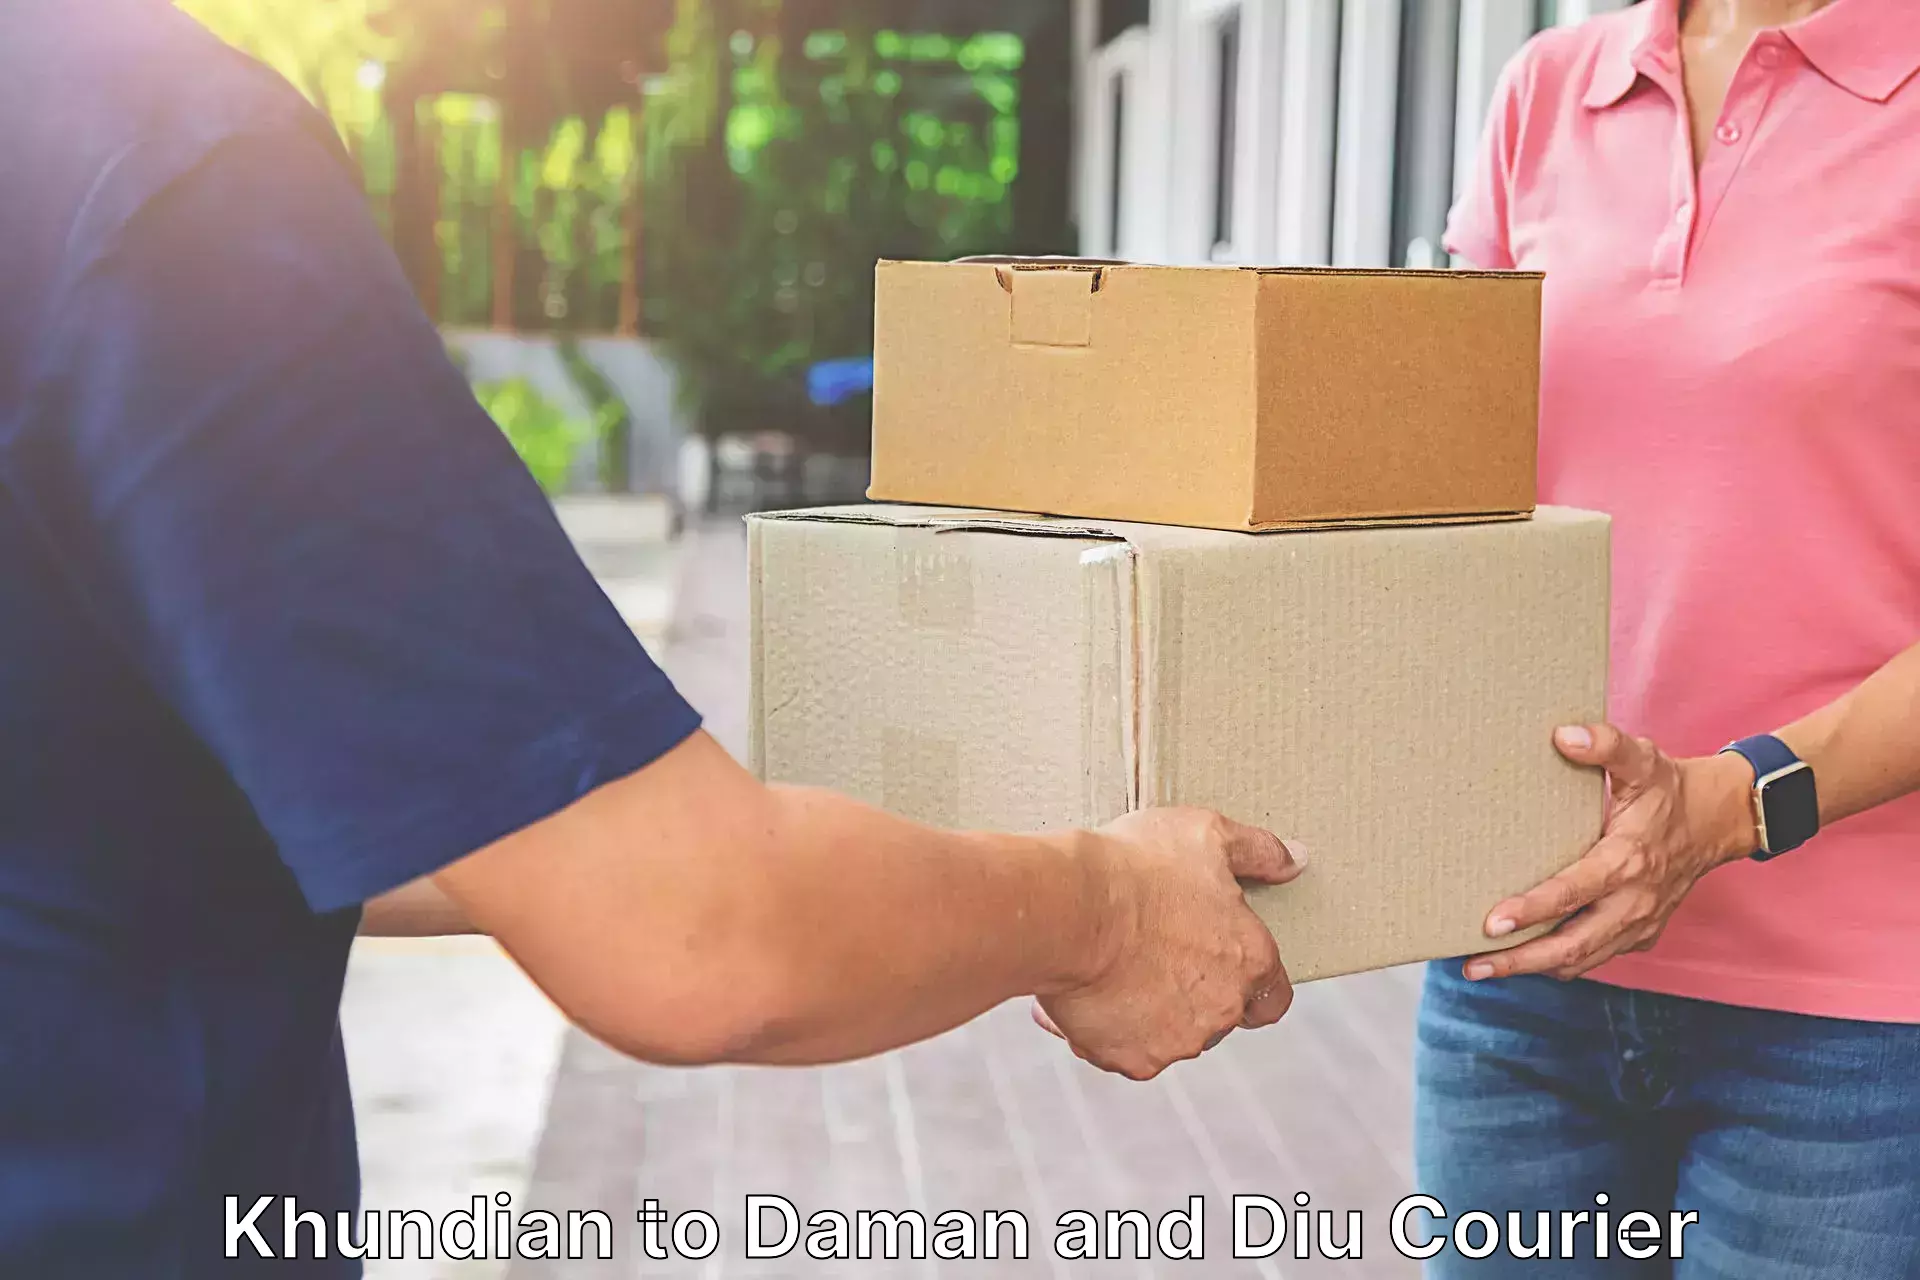 Automated parcel services Khundian to Daman